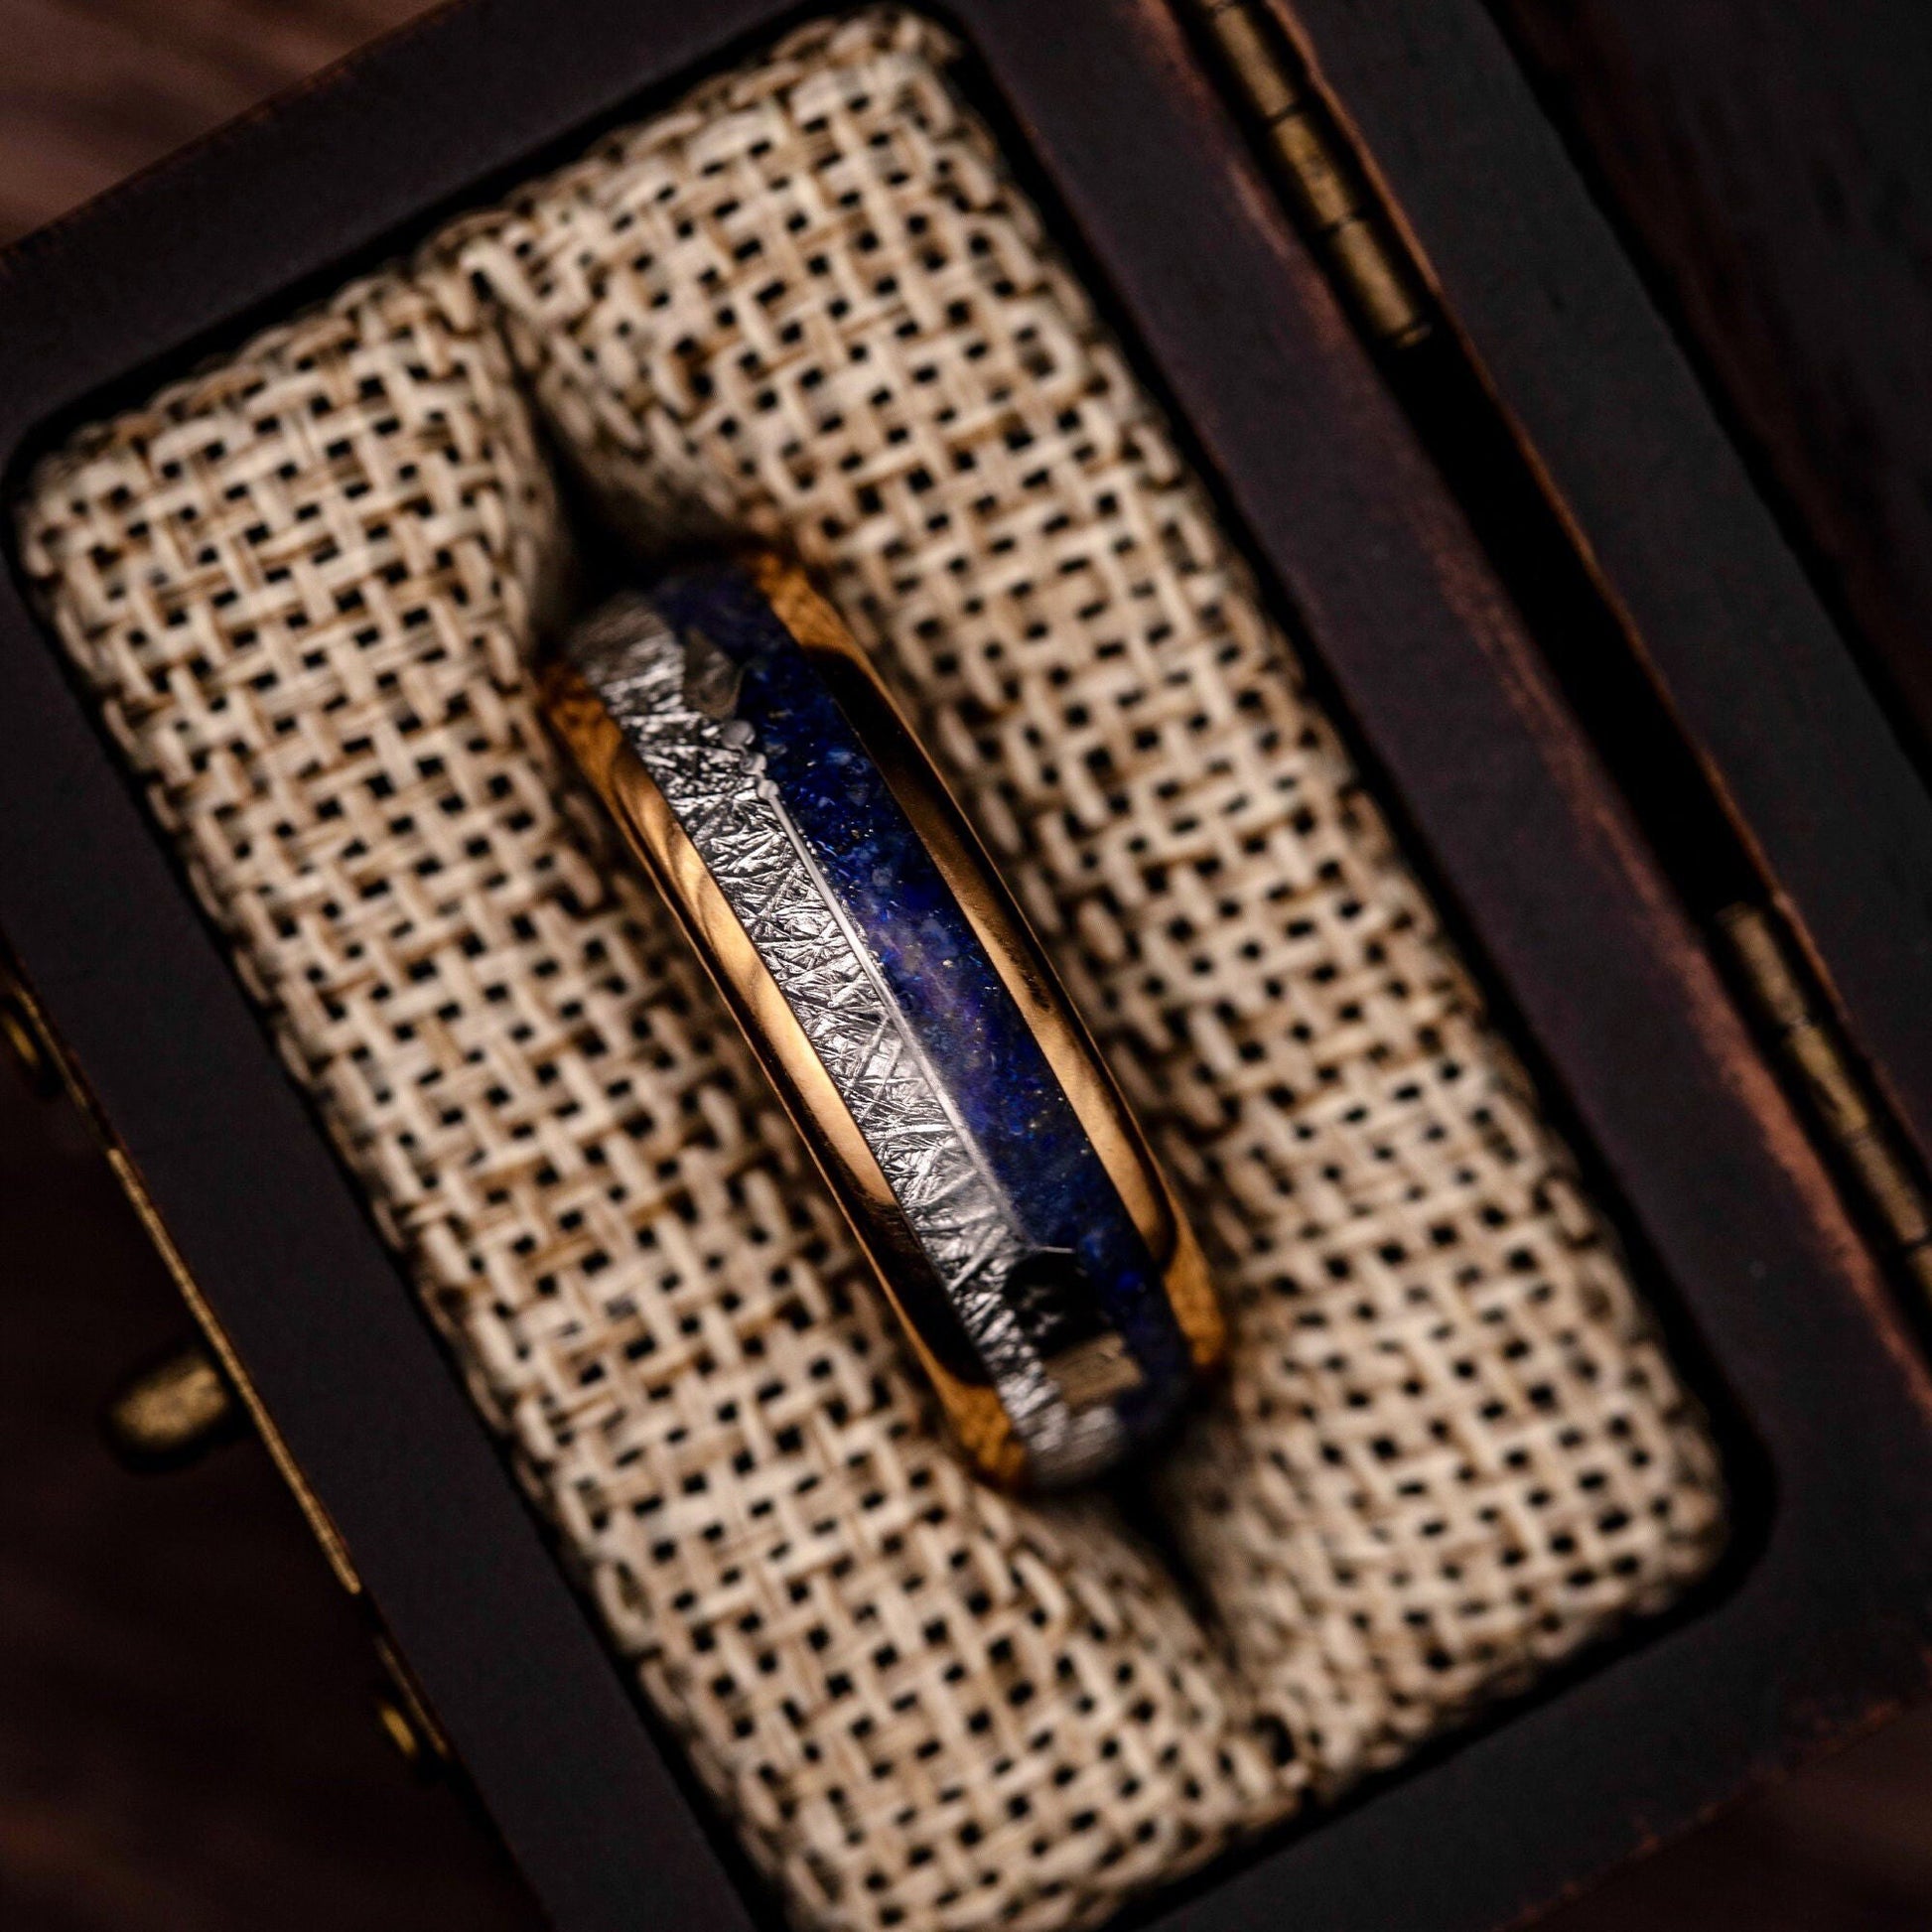 Sophisticated rose gold wedding band adorned with lapis lazuli and meteorite.